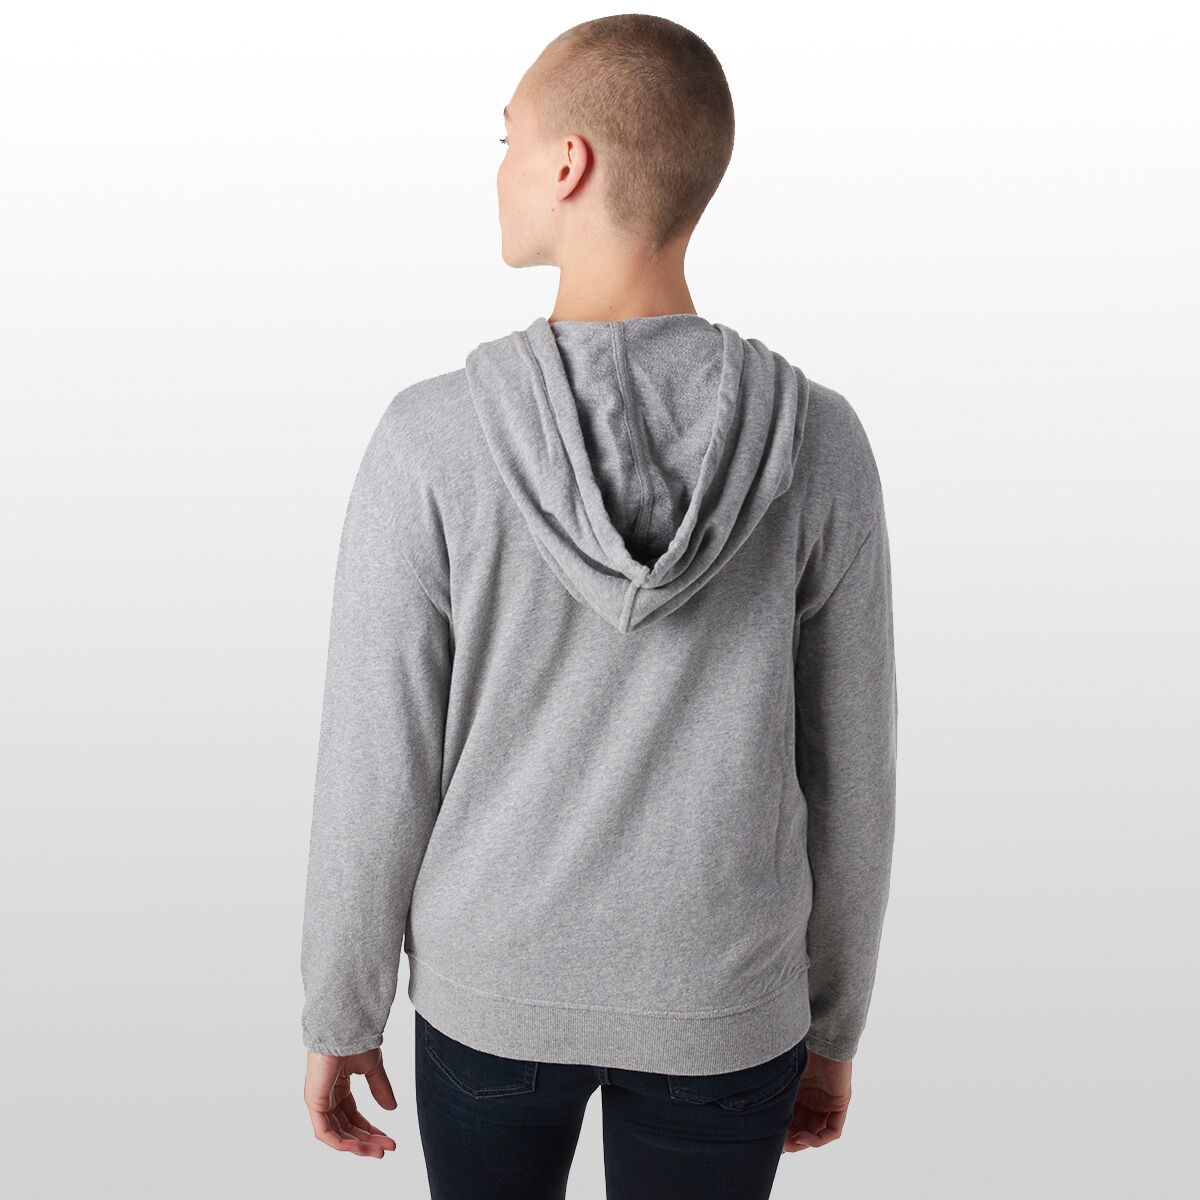 Patagonia Organic Cotton French Terry Hoodie - Women's - Clothing